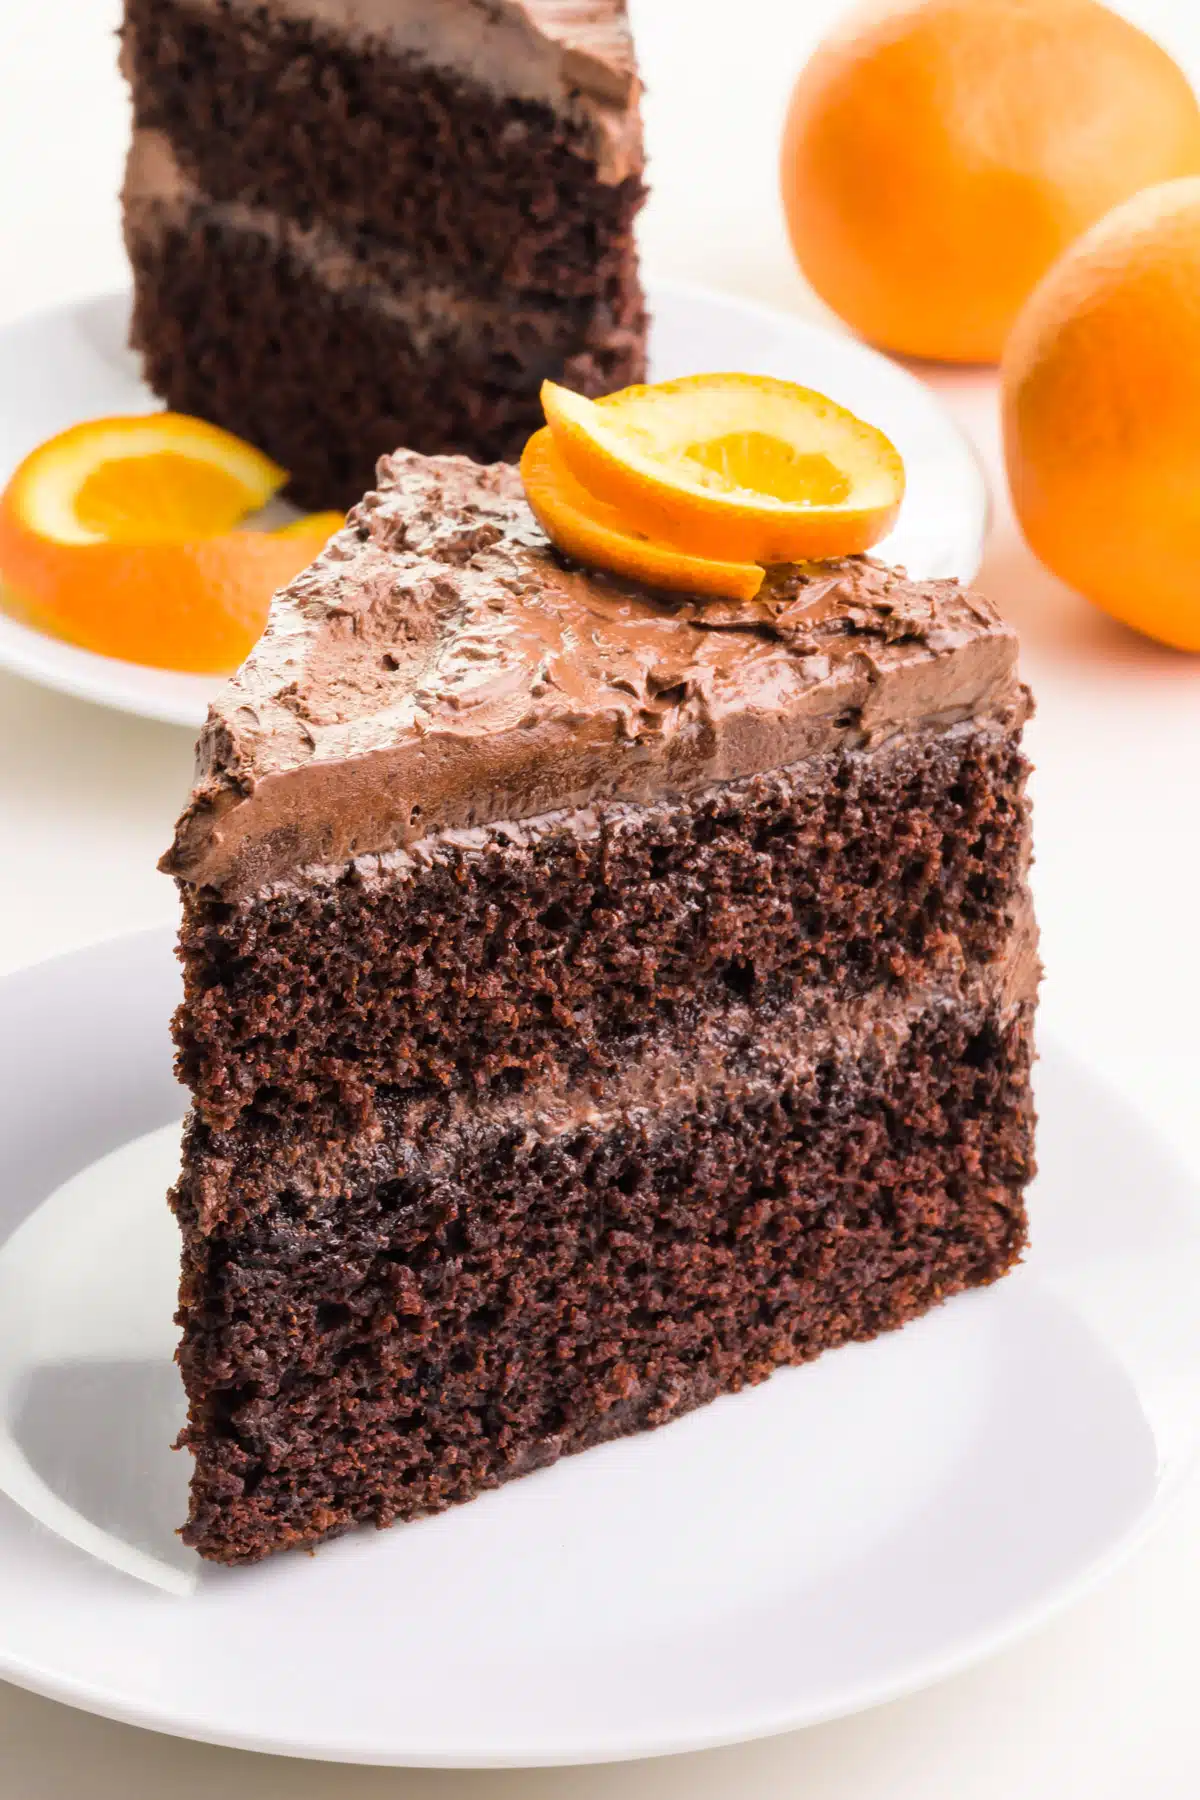 A slice of layered chocolate cake has an orange slice on top. Another slice in the background has an orange slice on the plate. There are 2 fresh oranges in the background.